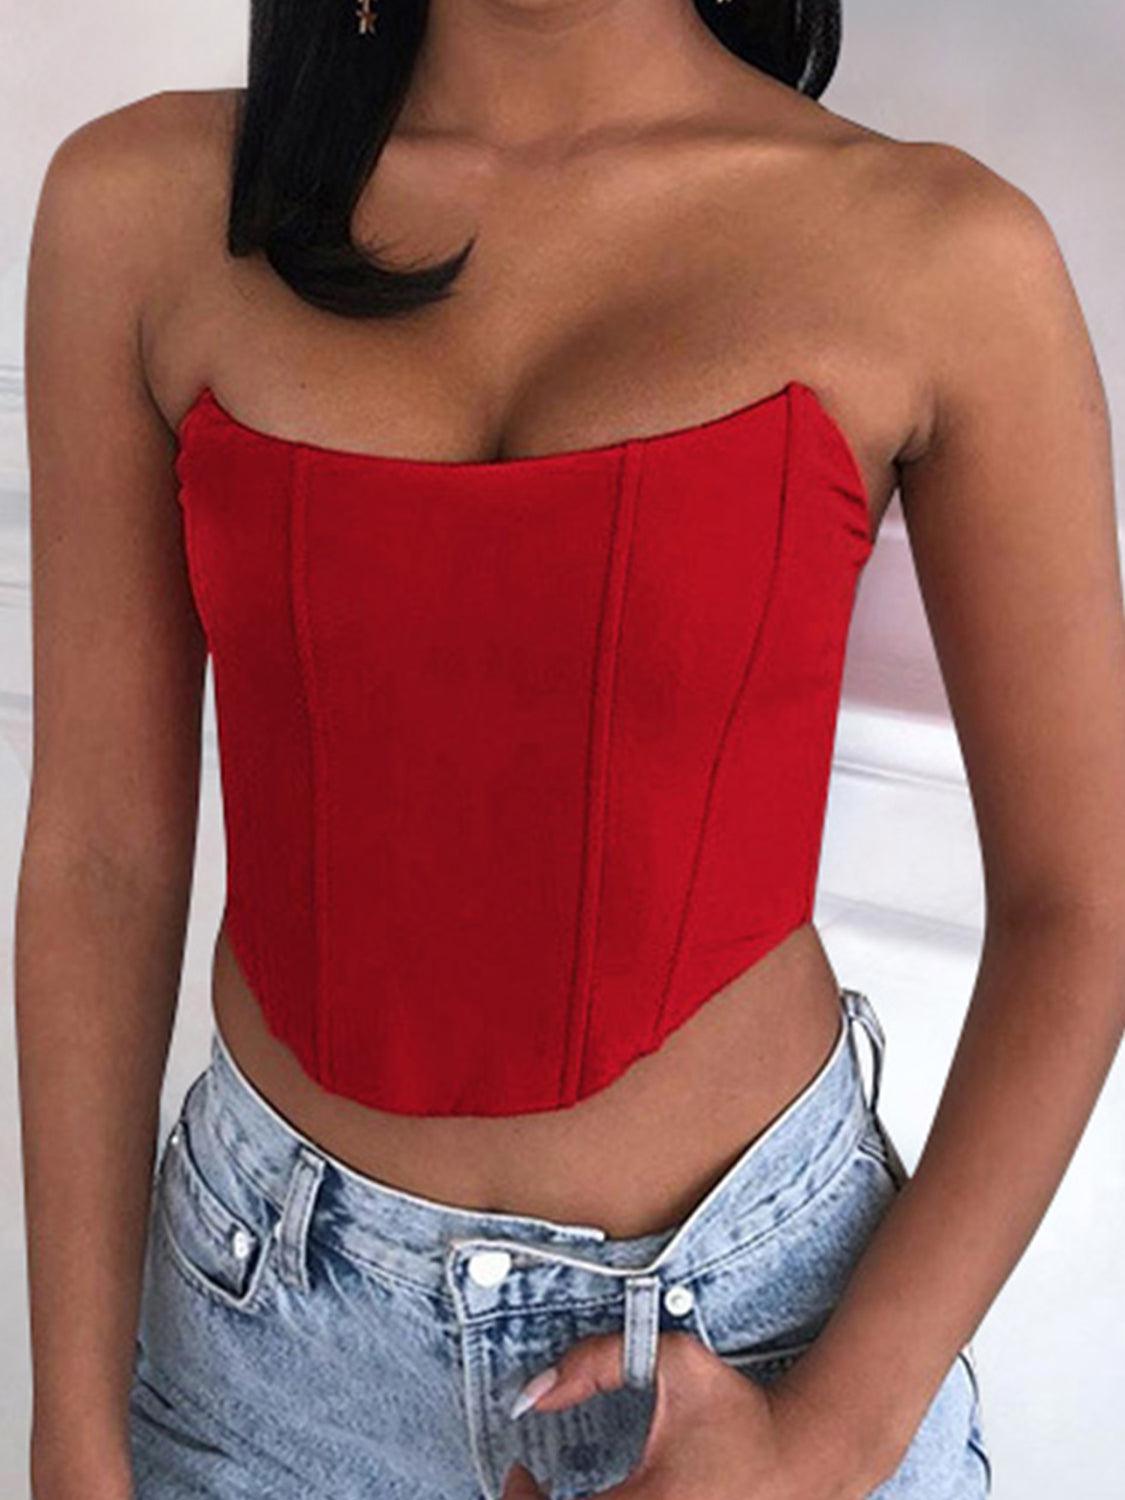 a woman wearing a red top and denim shorts